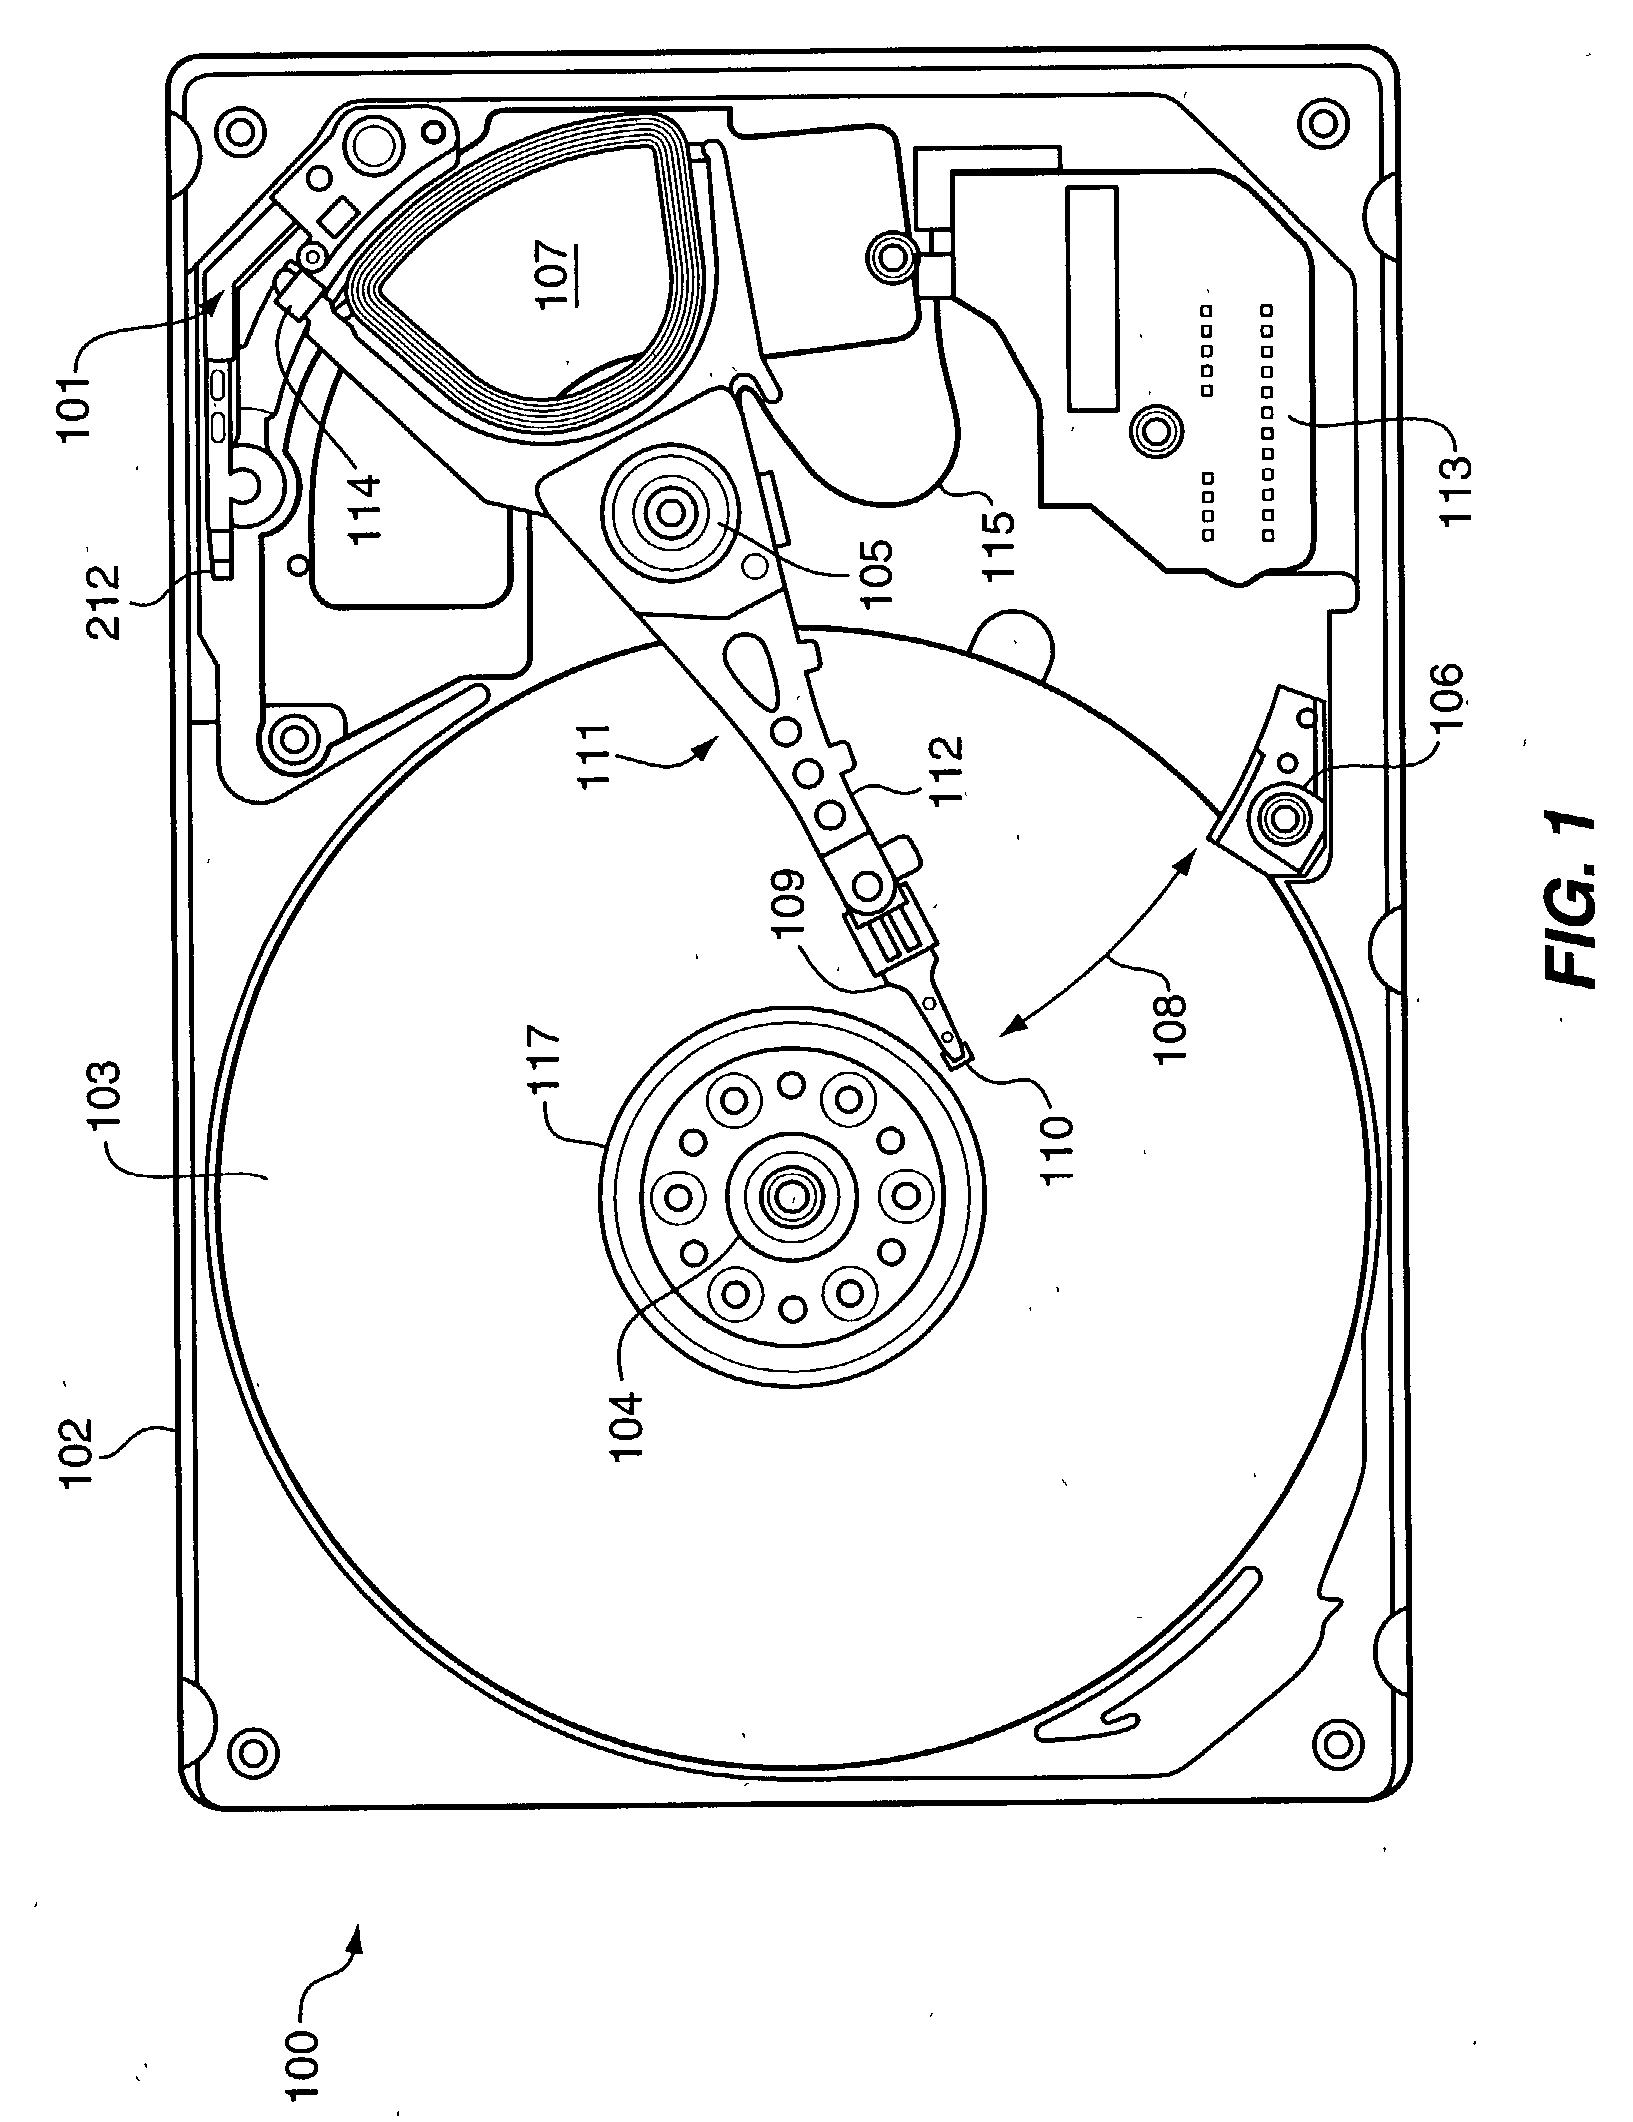 Peizoelectric microactuator and sensor failure detection in disk drives